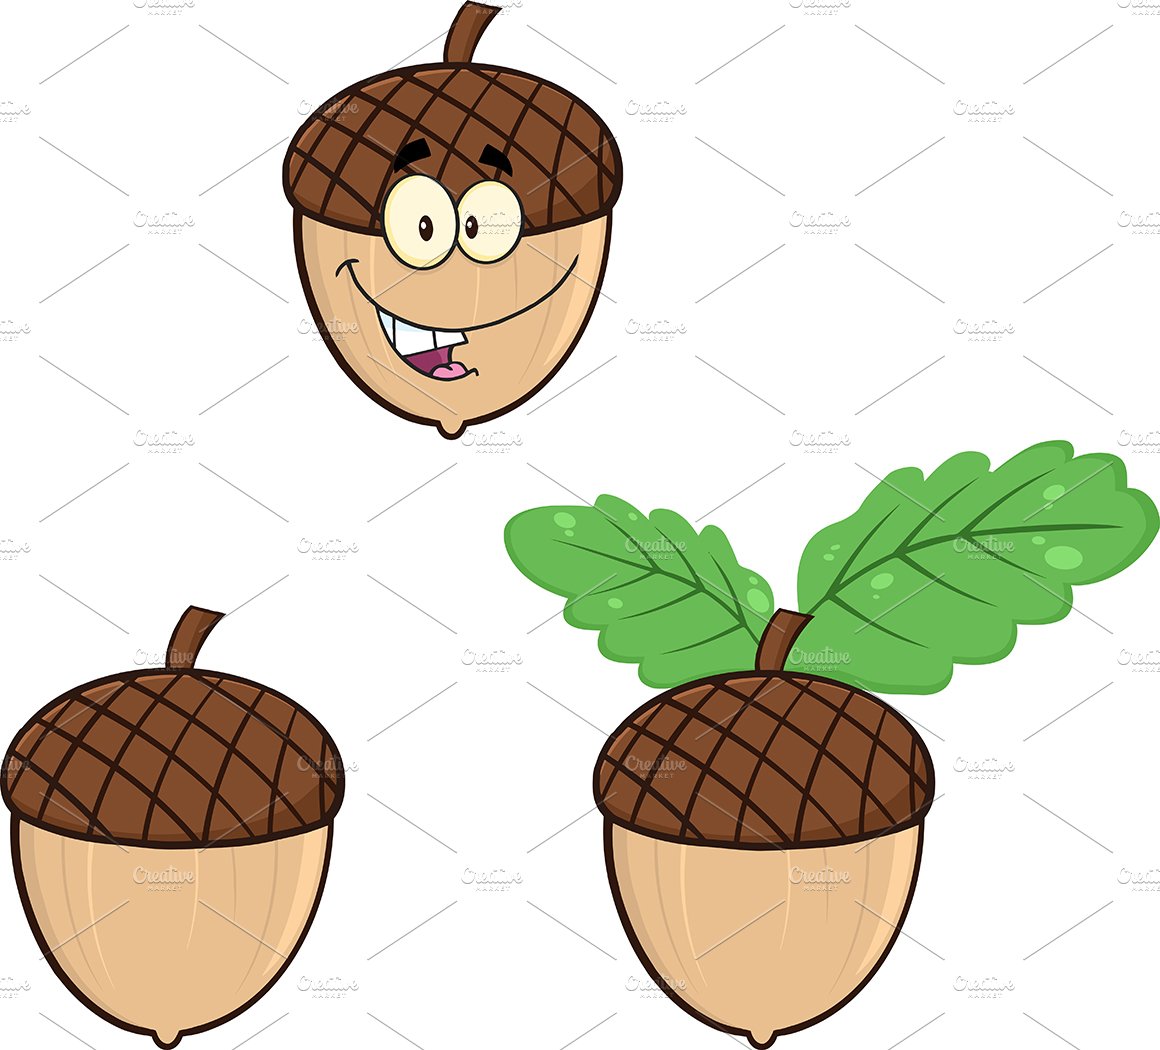 Acorns Cartoon Collection cover image.